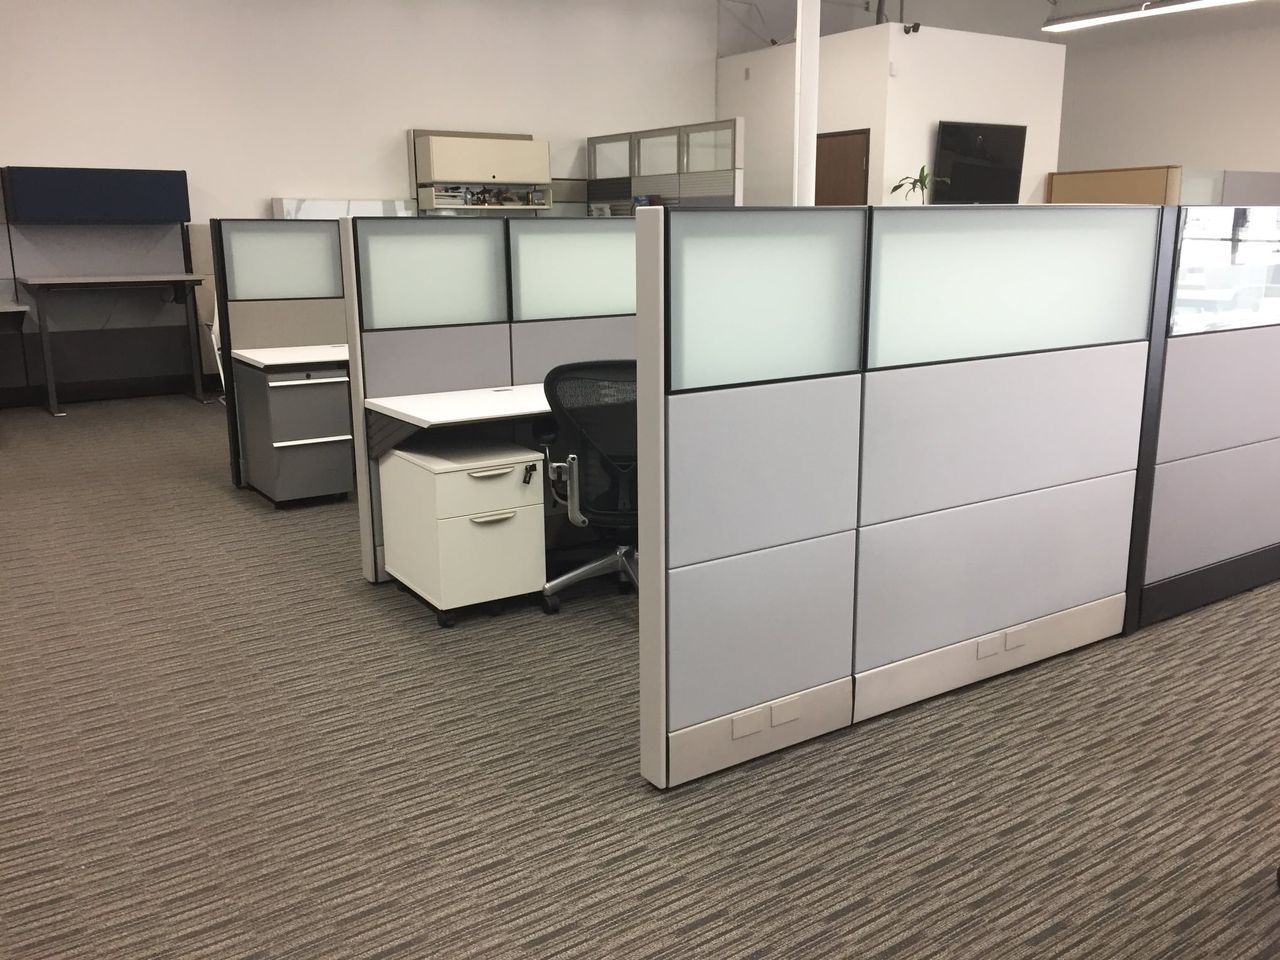 Buy Used Office Cubicles And Furniture Liquidations In Orange County